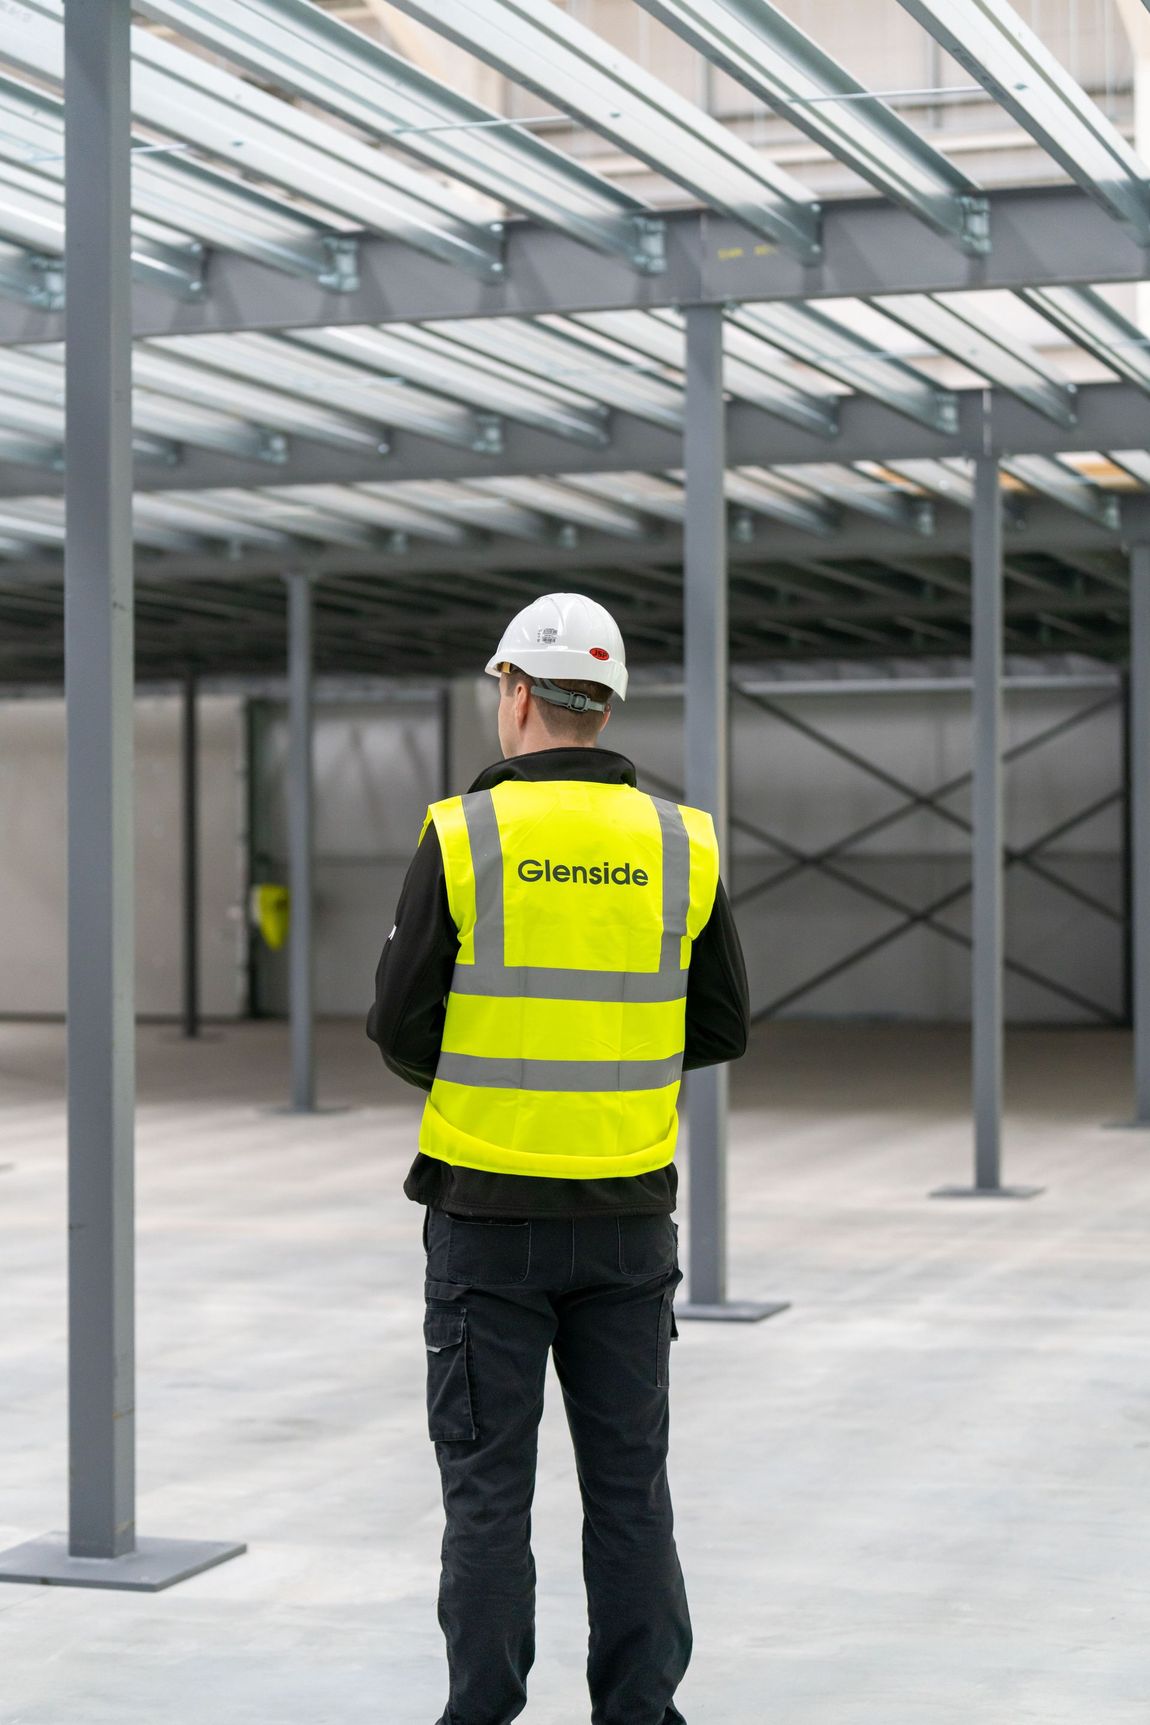 A man wearing a hard hat and a yellow vest is standing in an empty room.